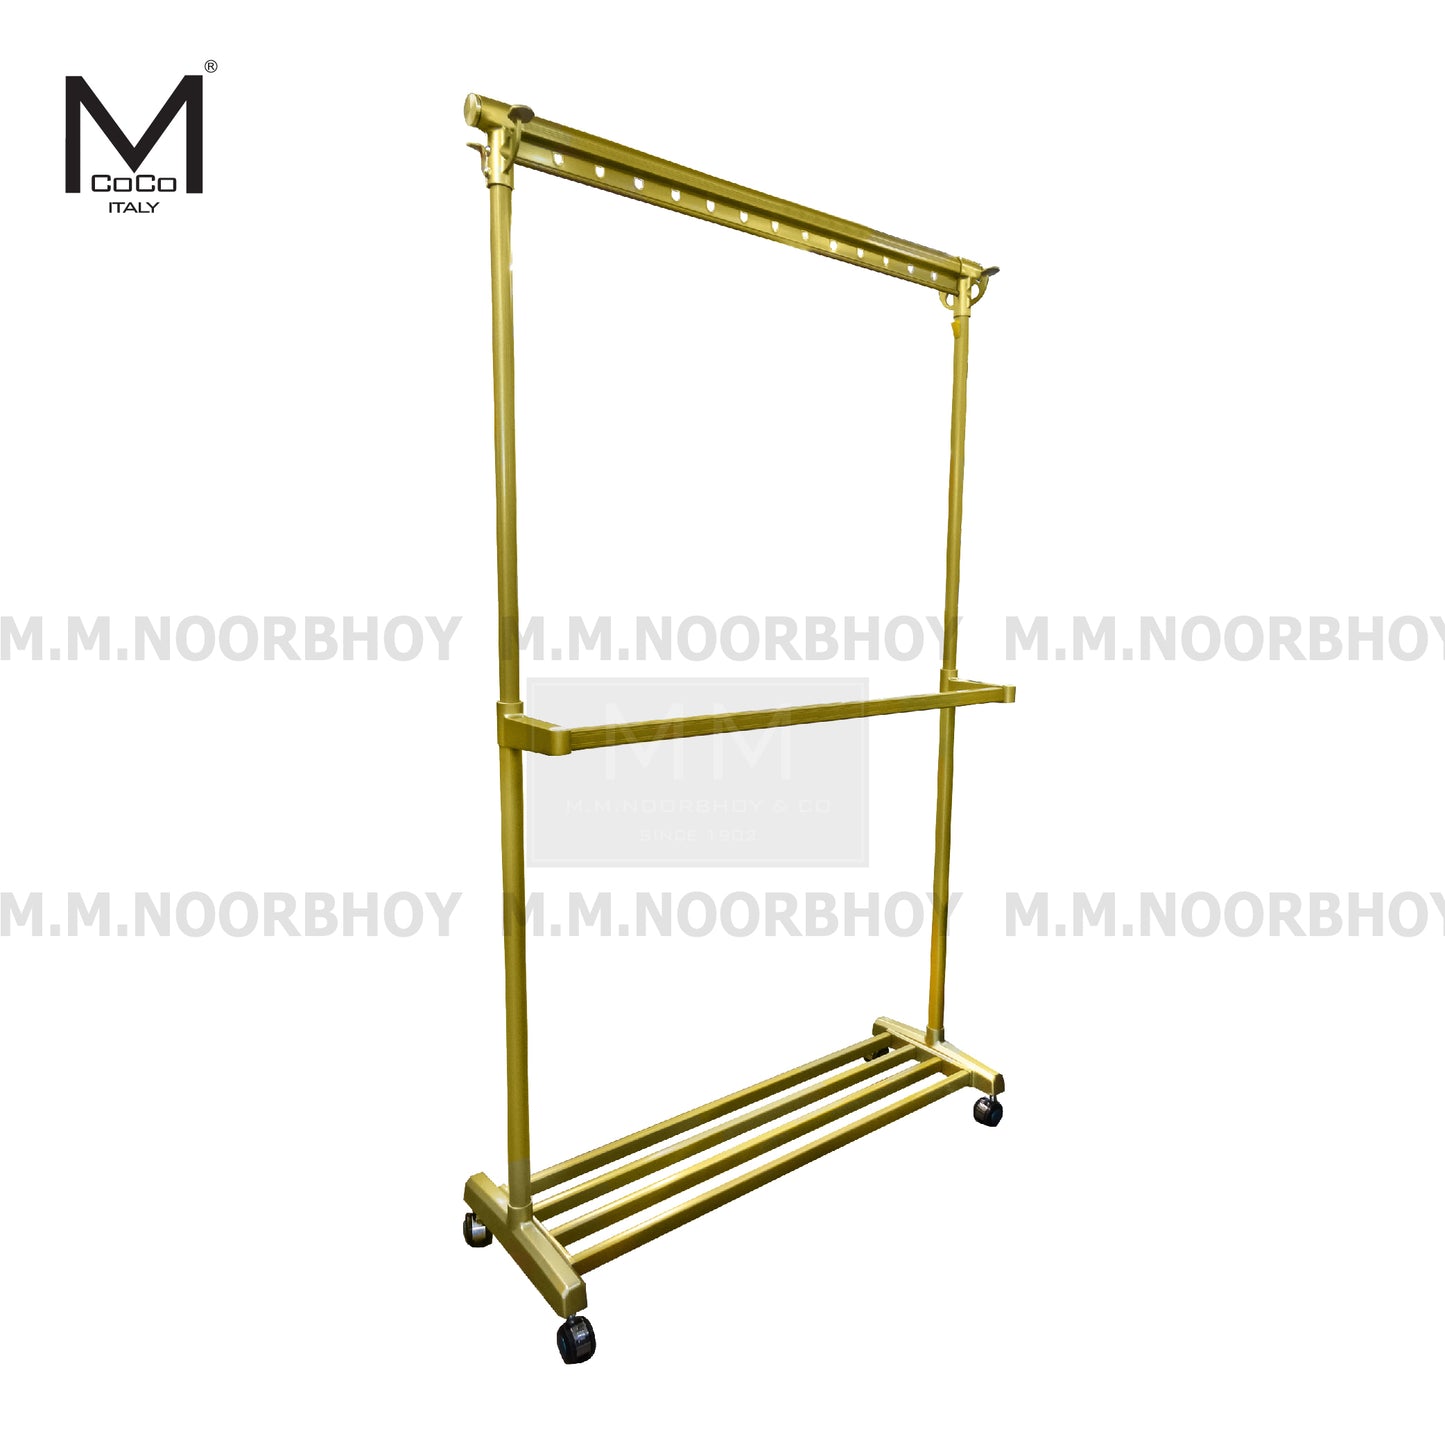 Mcoco Cloth Rack With 13 Hook Holes Dimension 36x24x45.5- 72" Inches Aluminium Gold Colour - HF06.1208